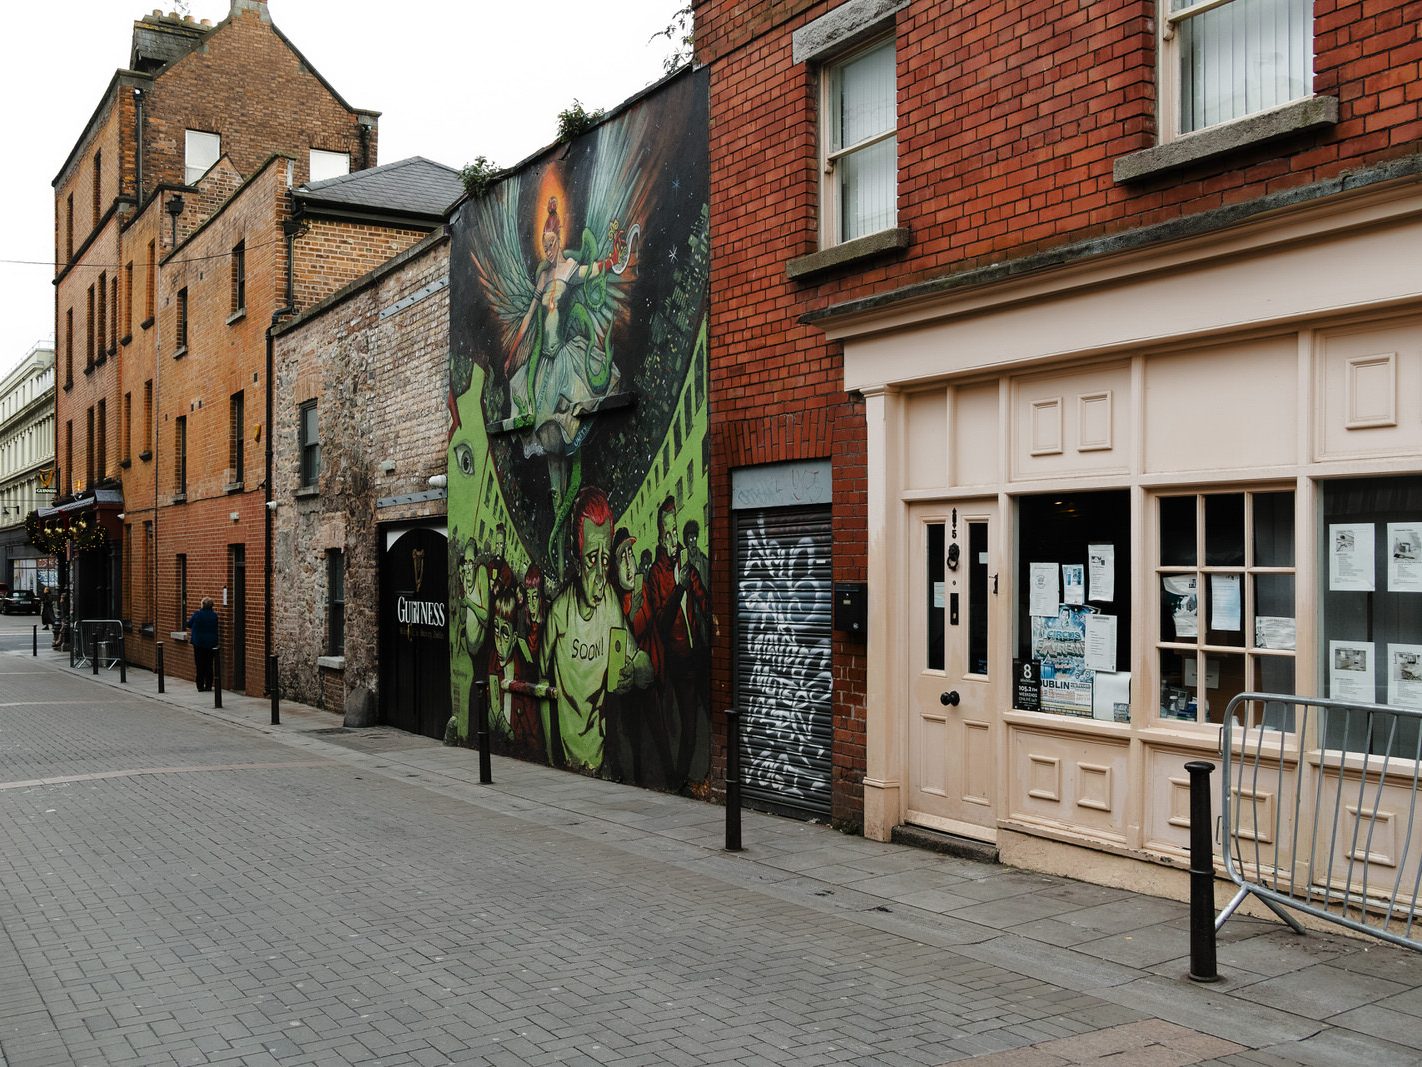 PHONE ZOMBIES IS A STREET ART MURAL WITH A MESSAGE [LOCATED ON CAMDEN ROW]-226218-1